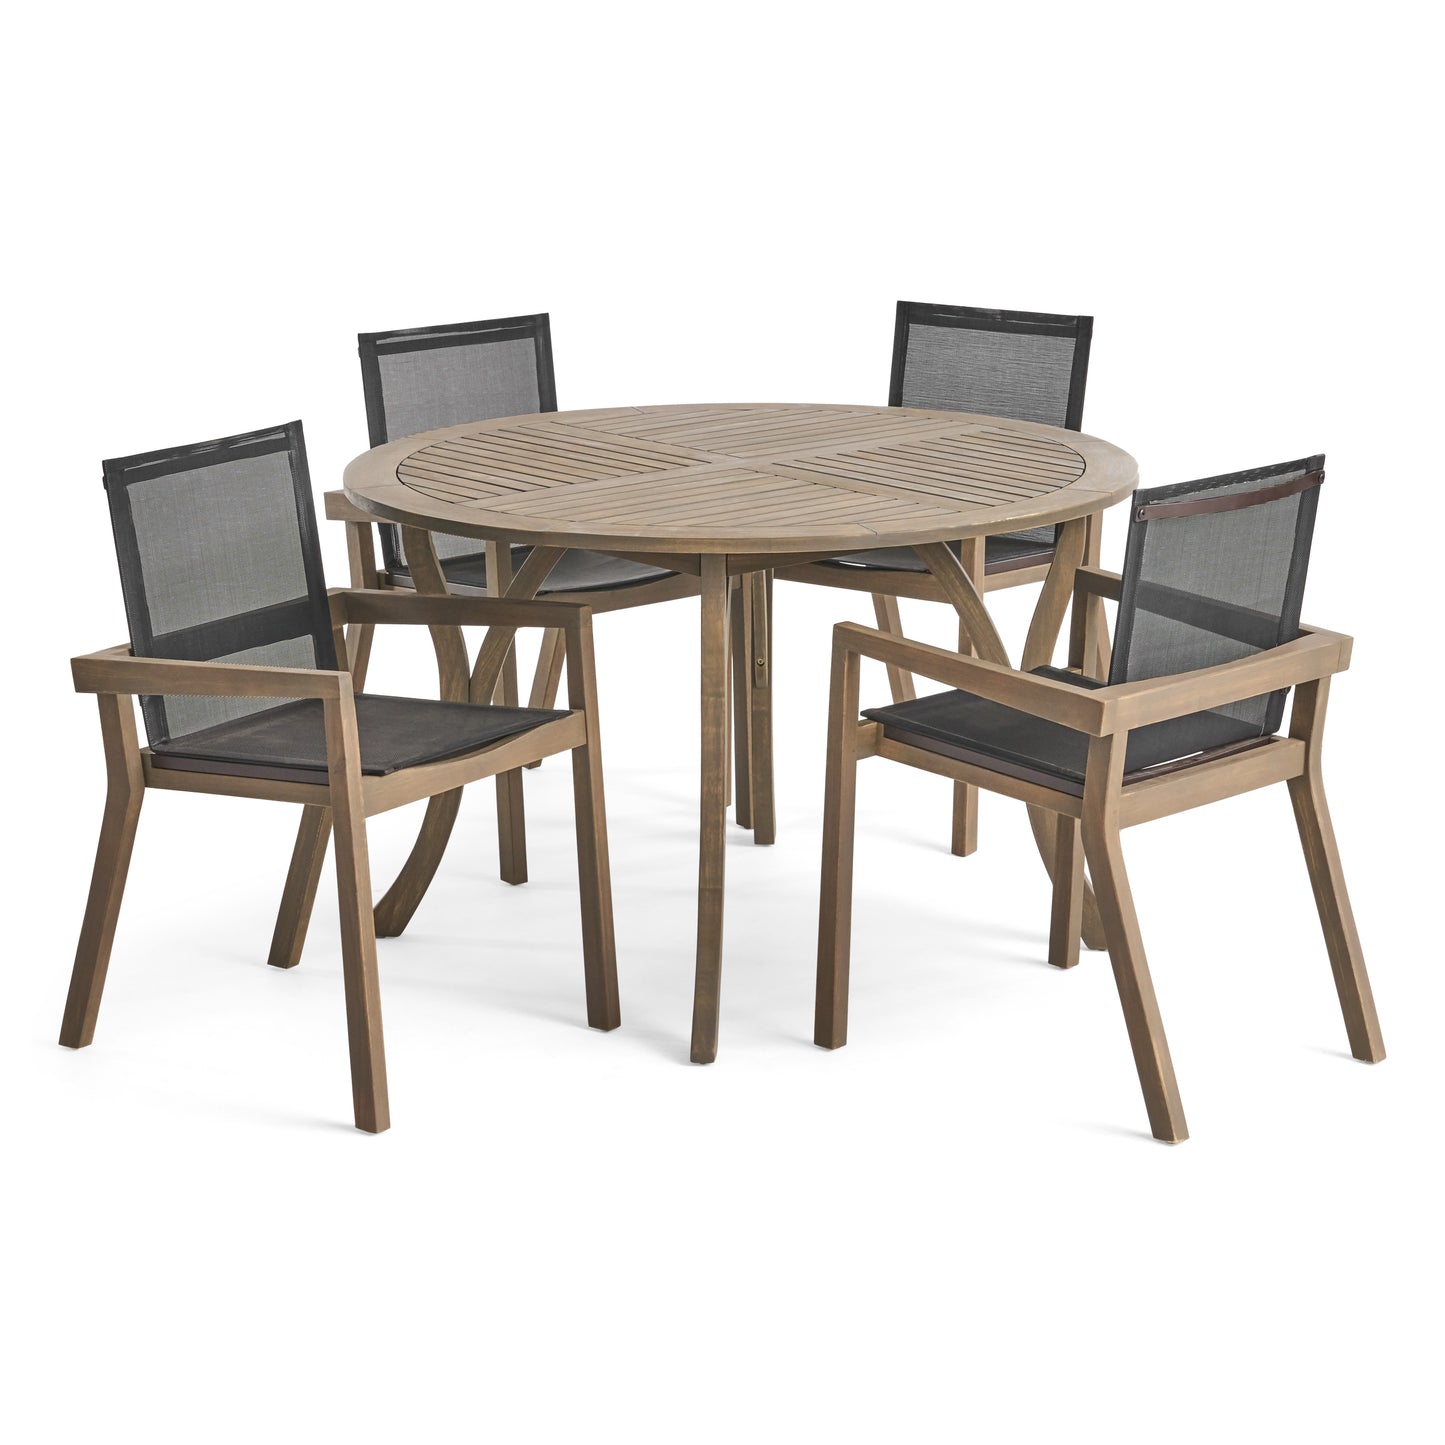 Spencer Outdoor Acacia Wood 5 Piece Round Dining Set with Mesh Seats